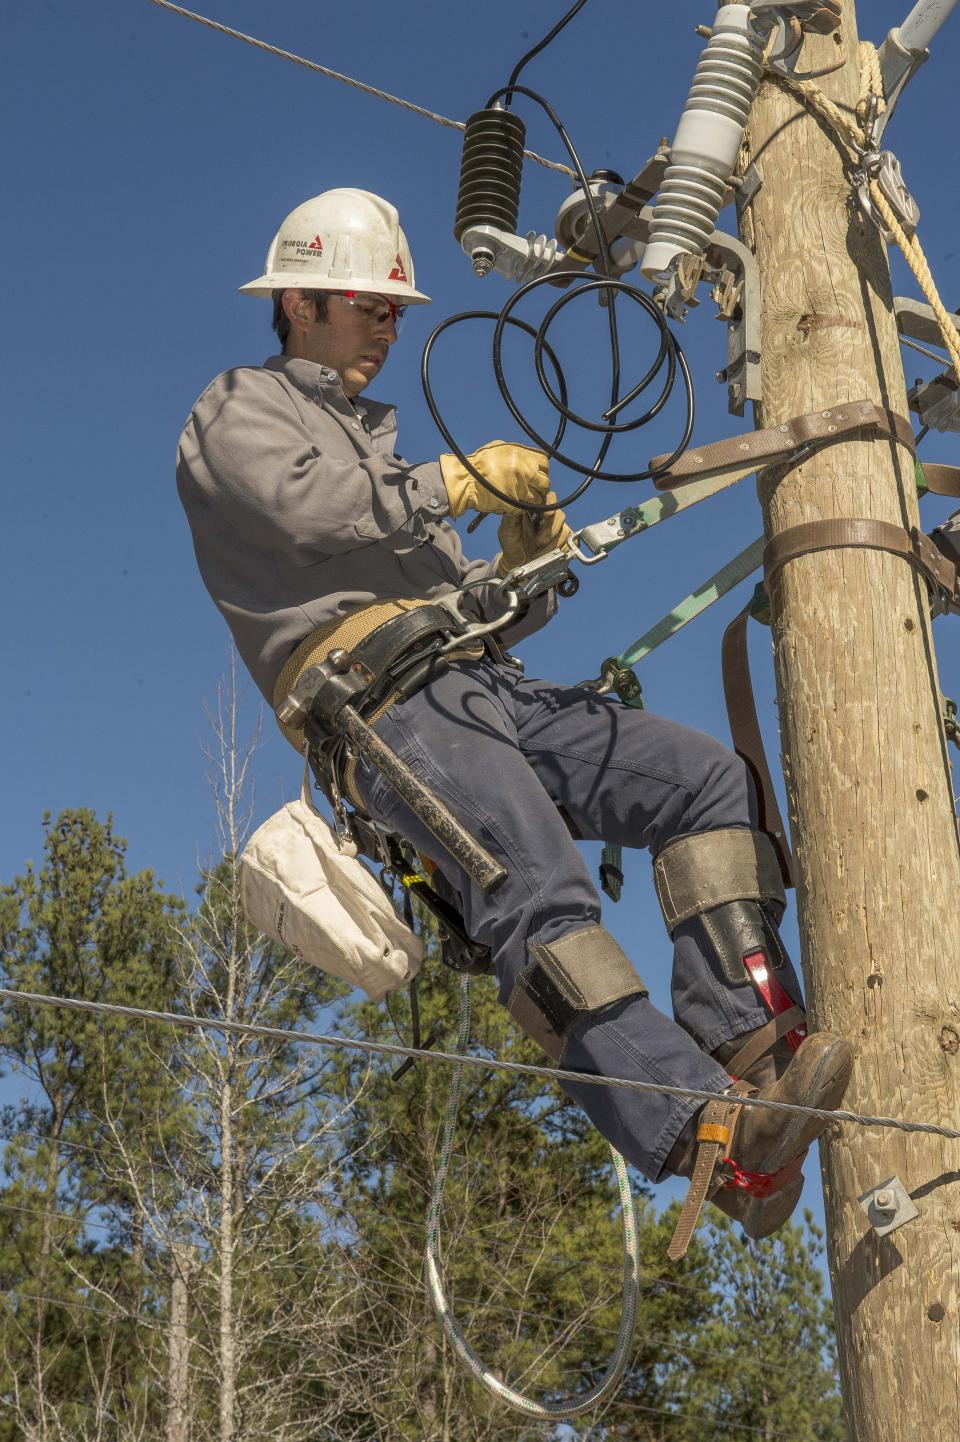 Matthew Ortiz is a lineman for Southern Company subsidiary Georgia Power.